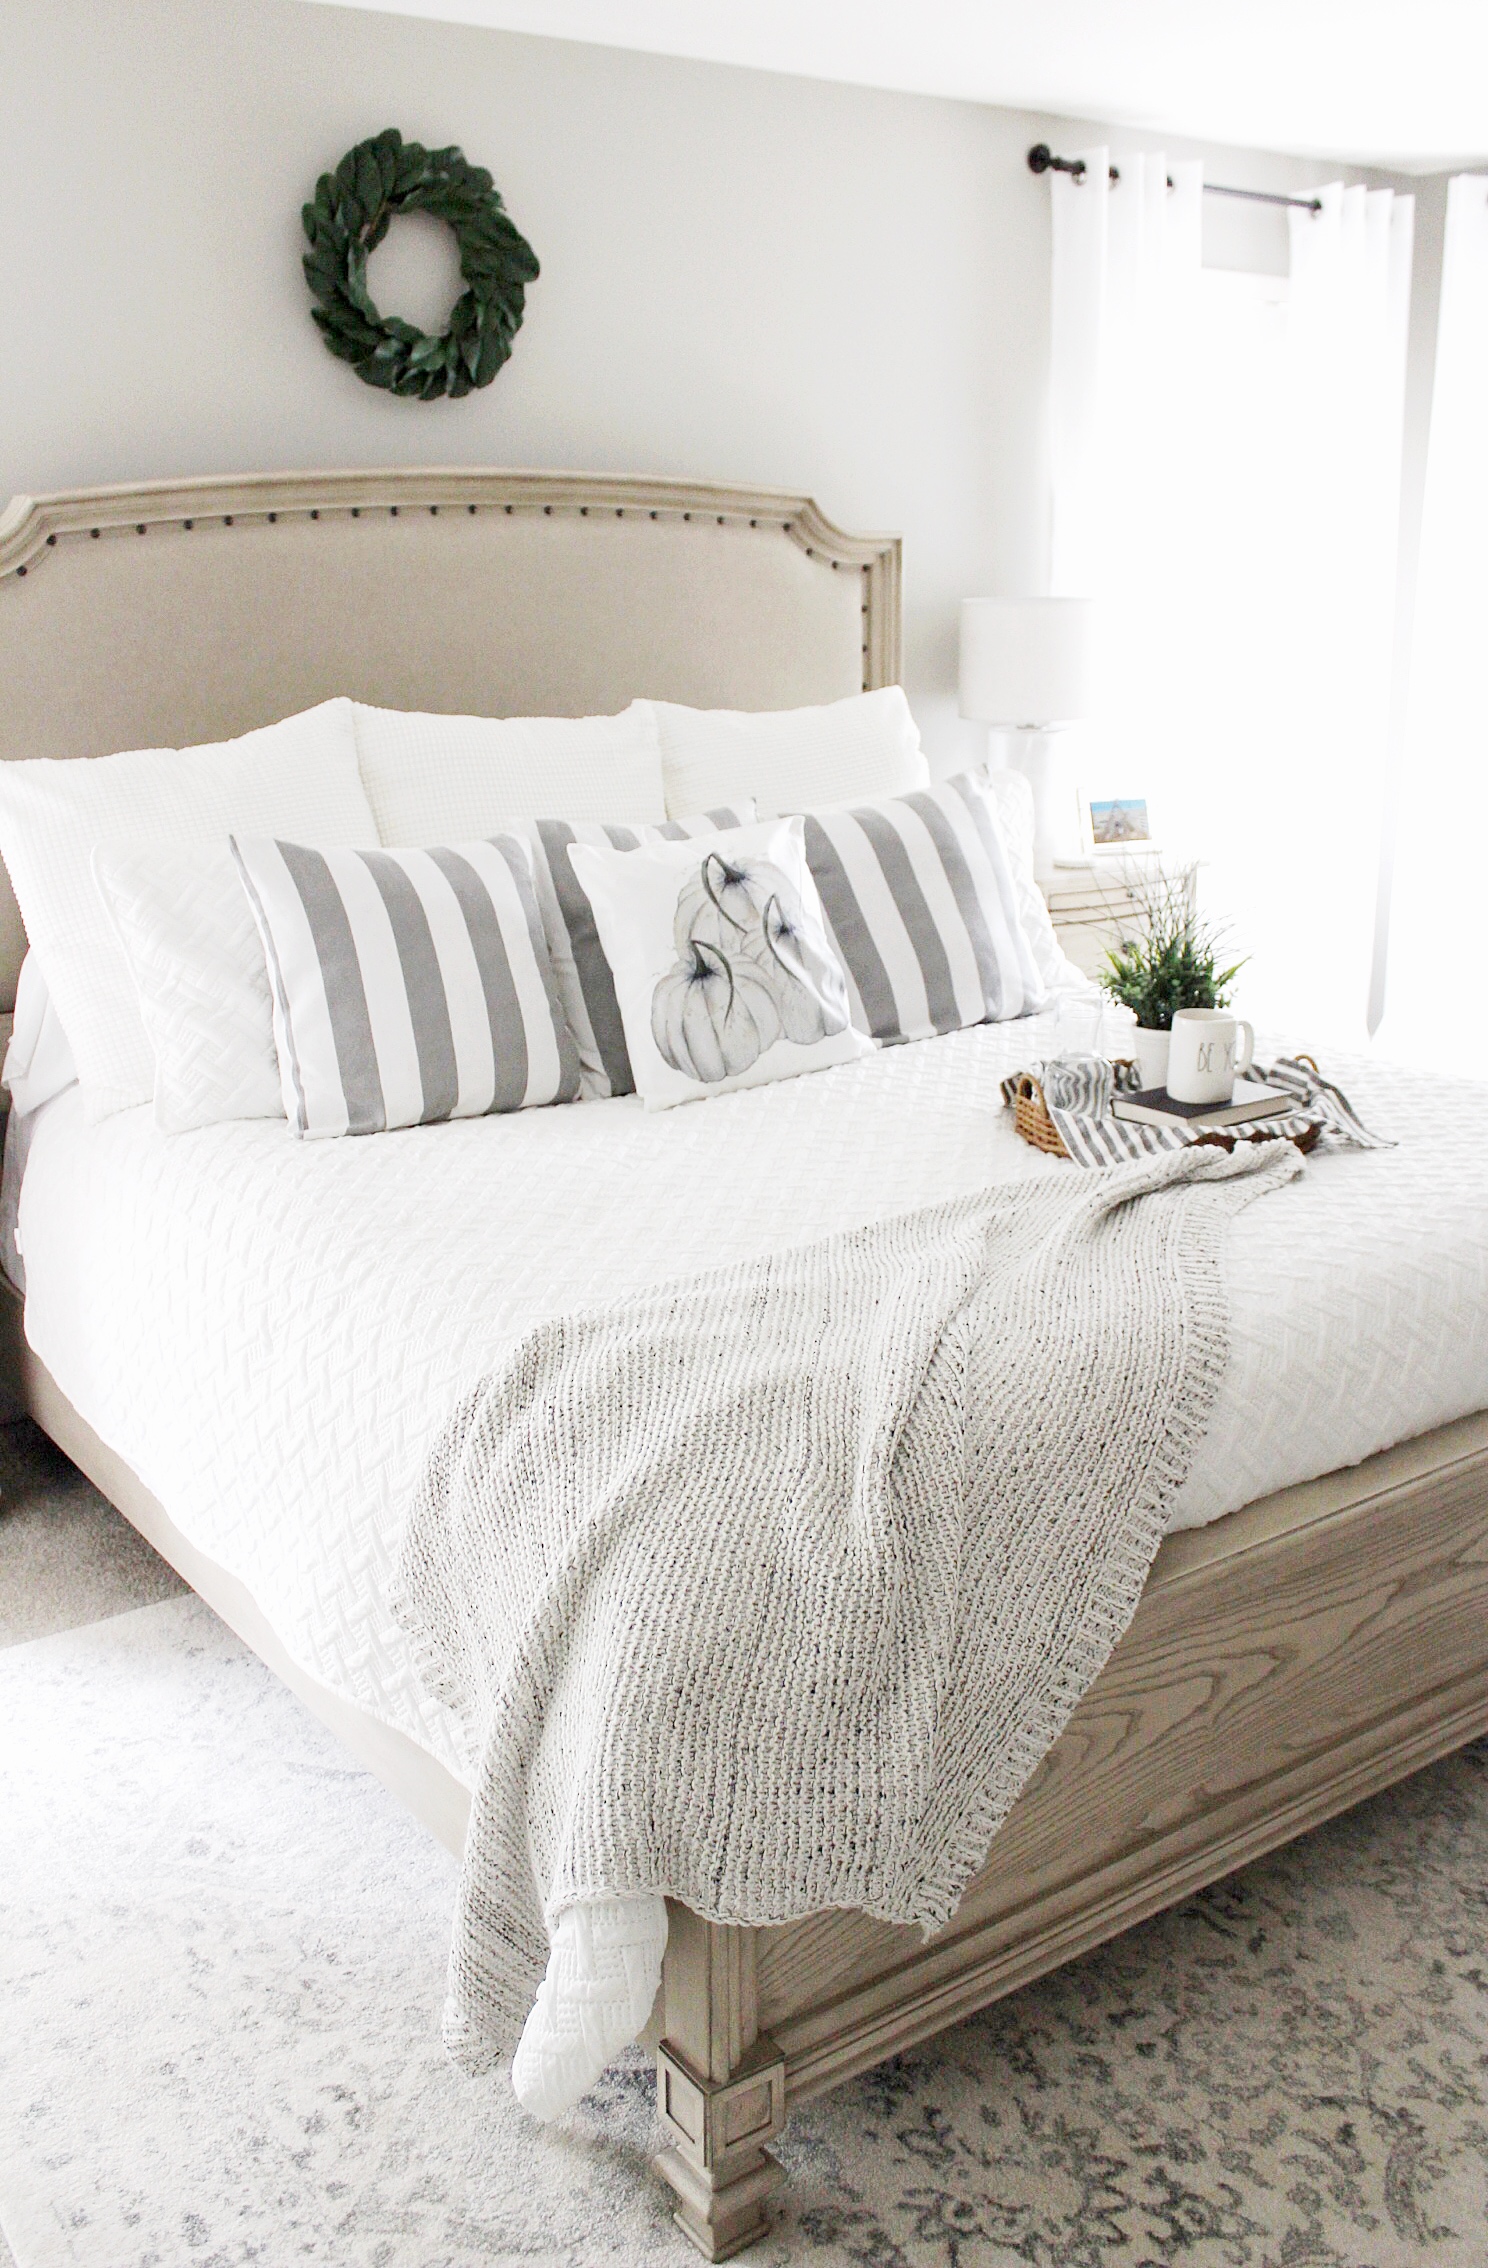 Updated Bedroom Tour • Robyn's Southern Nest